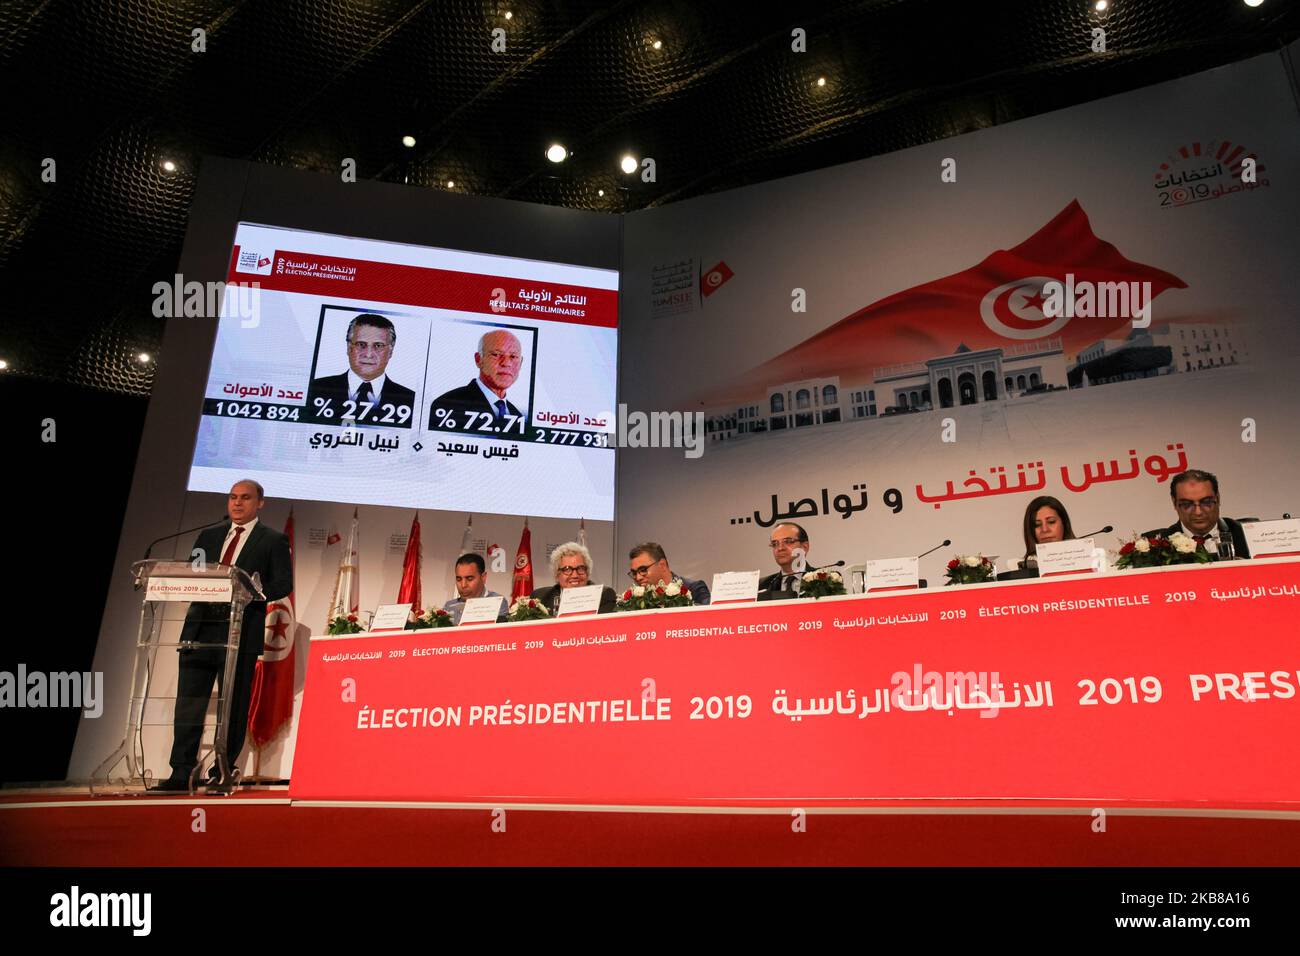 Portraits of presidential candidates Kais Saied and Nabil Karoui screened during a press conference held by the Independent High Authority for Elections (ISIE), to announce the official preliminary results of the presidential election runoff in Tunis, Tunisia, on October 14, 2019. Kais Saied, is ranked first in official results with 72,71 %, Nabil Karoui is ranked second with 27,29 %. (Photo by Chedly Ben Ibrahim/NurPhoto) Stock Photo